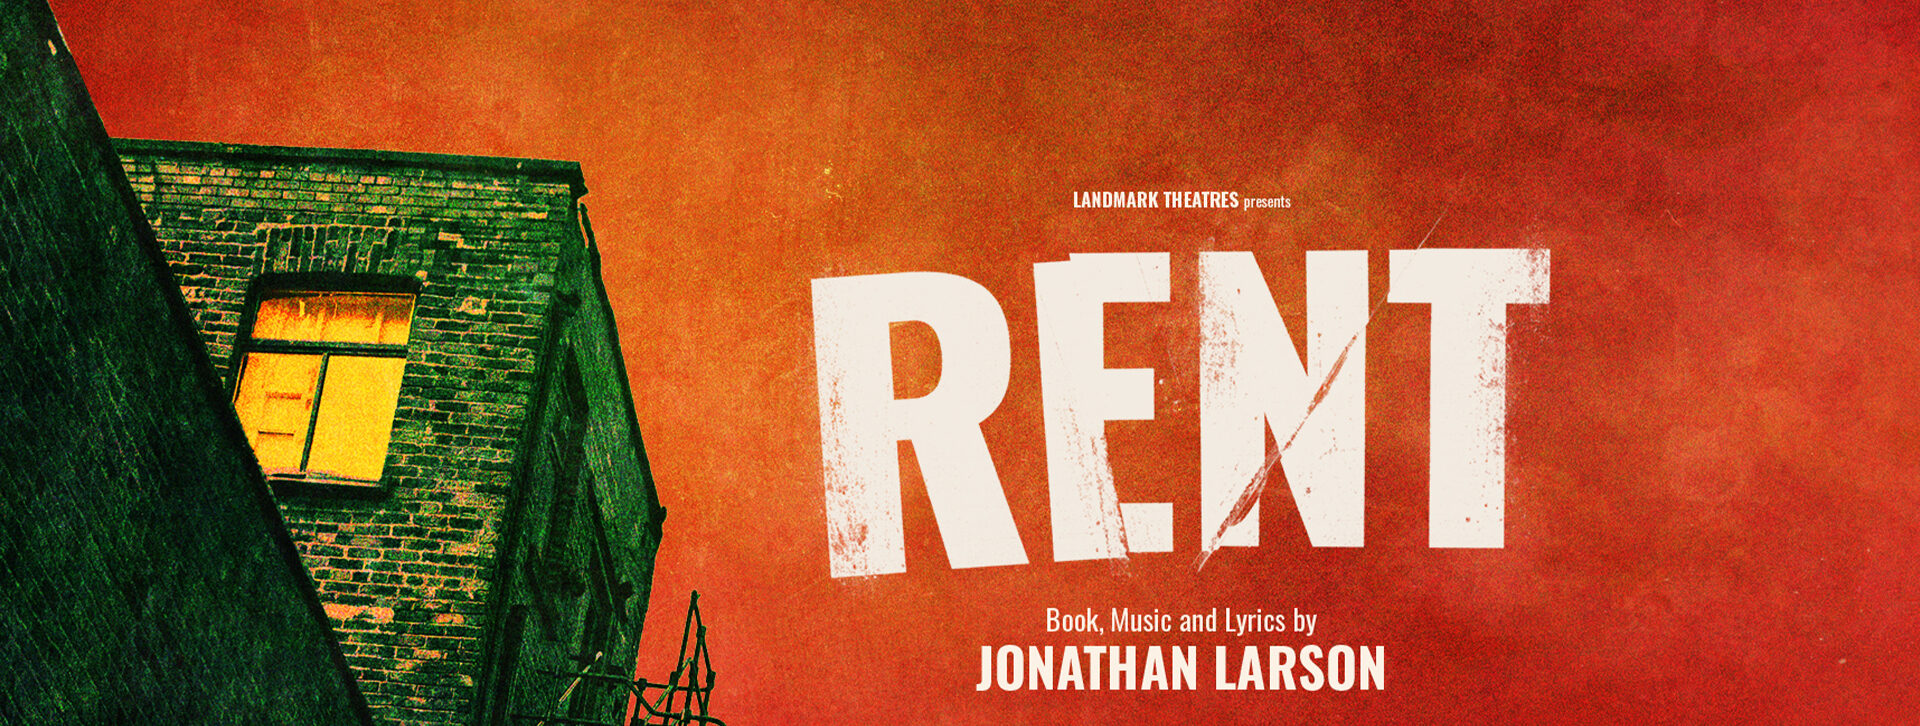 Landmark Theatres have announced their debut production of Jonathan Larson’s Tony and Pulitzer Prize-winning rock musical Rent.